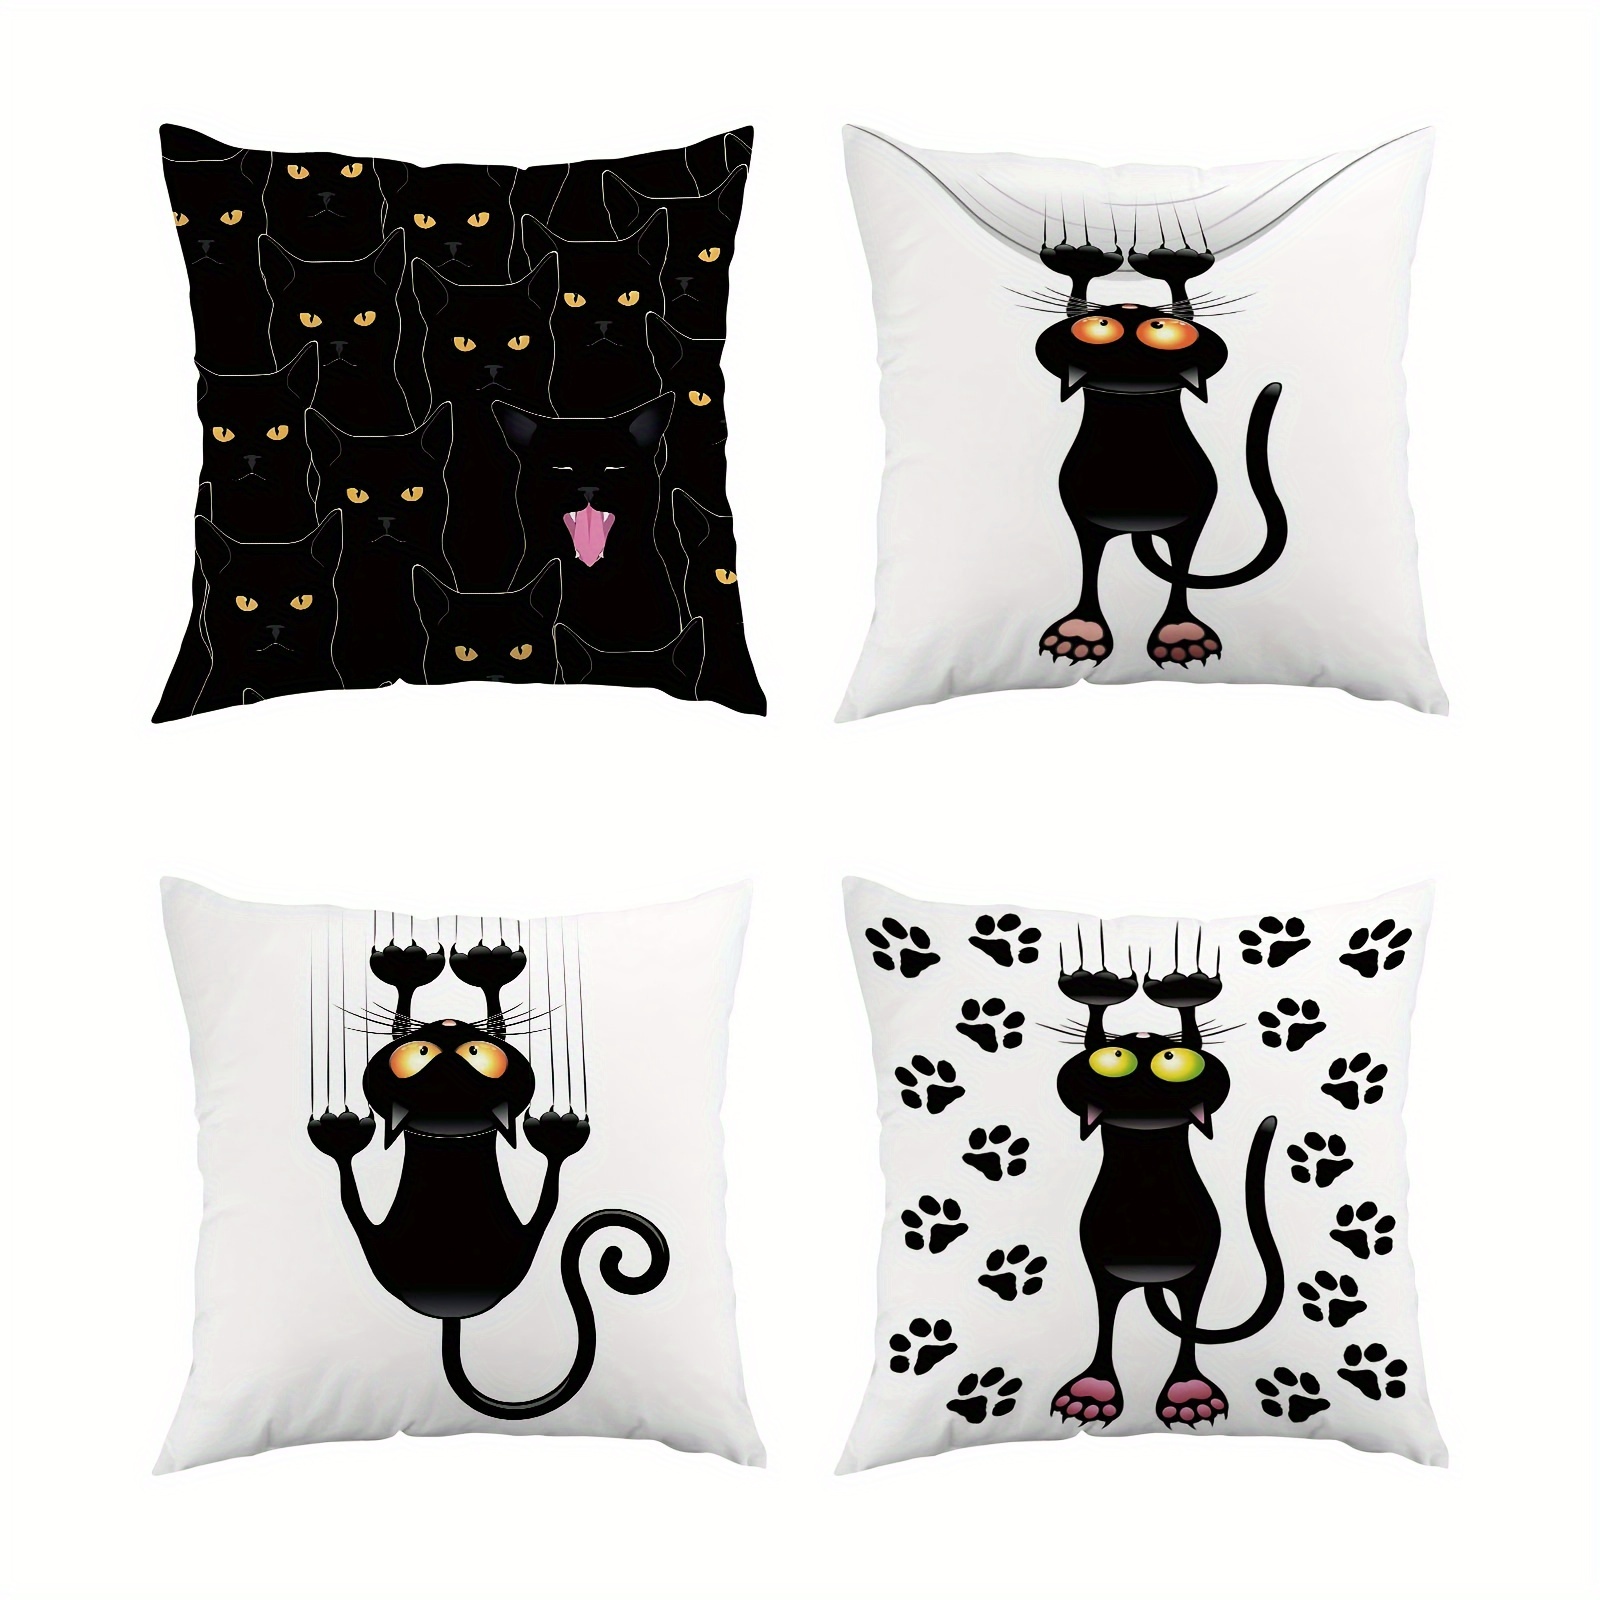 

1pc Black Cat Fun Design Soft Plush Pillow Cover, Zippered Single Side Printed Pillowcase, Contemporary Style Home Sofa Bedroom Decor, 18x18 Inches, Cushion Not Included